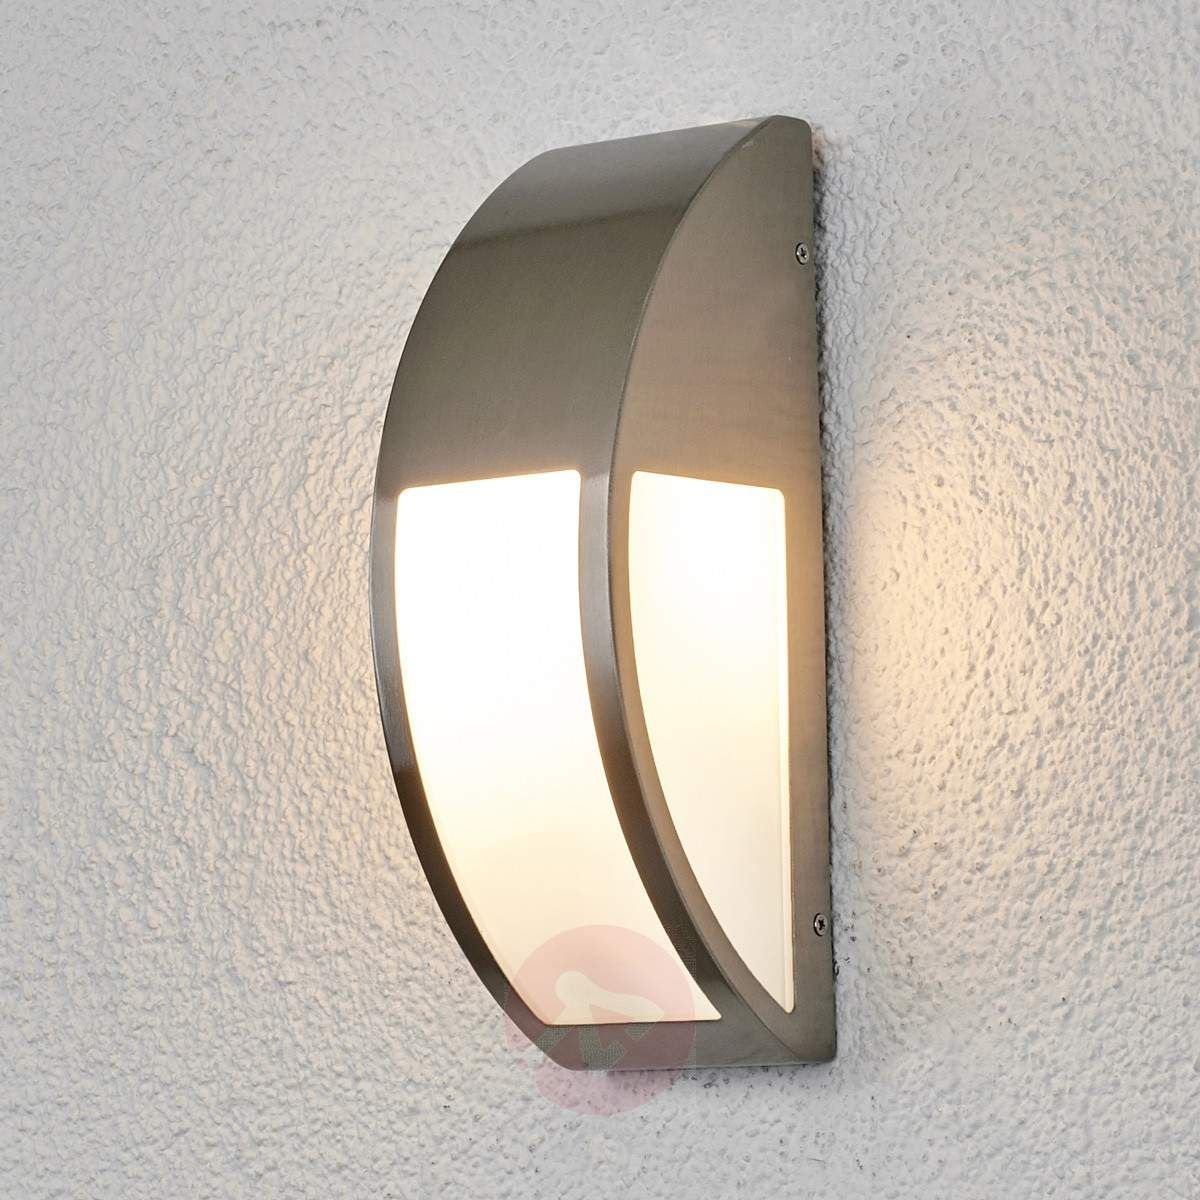 Marianna Perfectly Shaped Led Outdoor Wall Light | Lights (View 8 of 15)